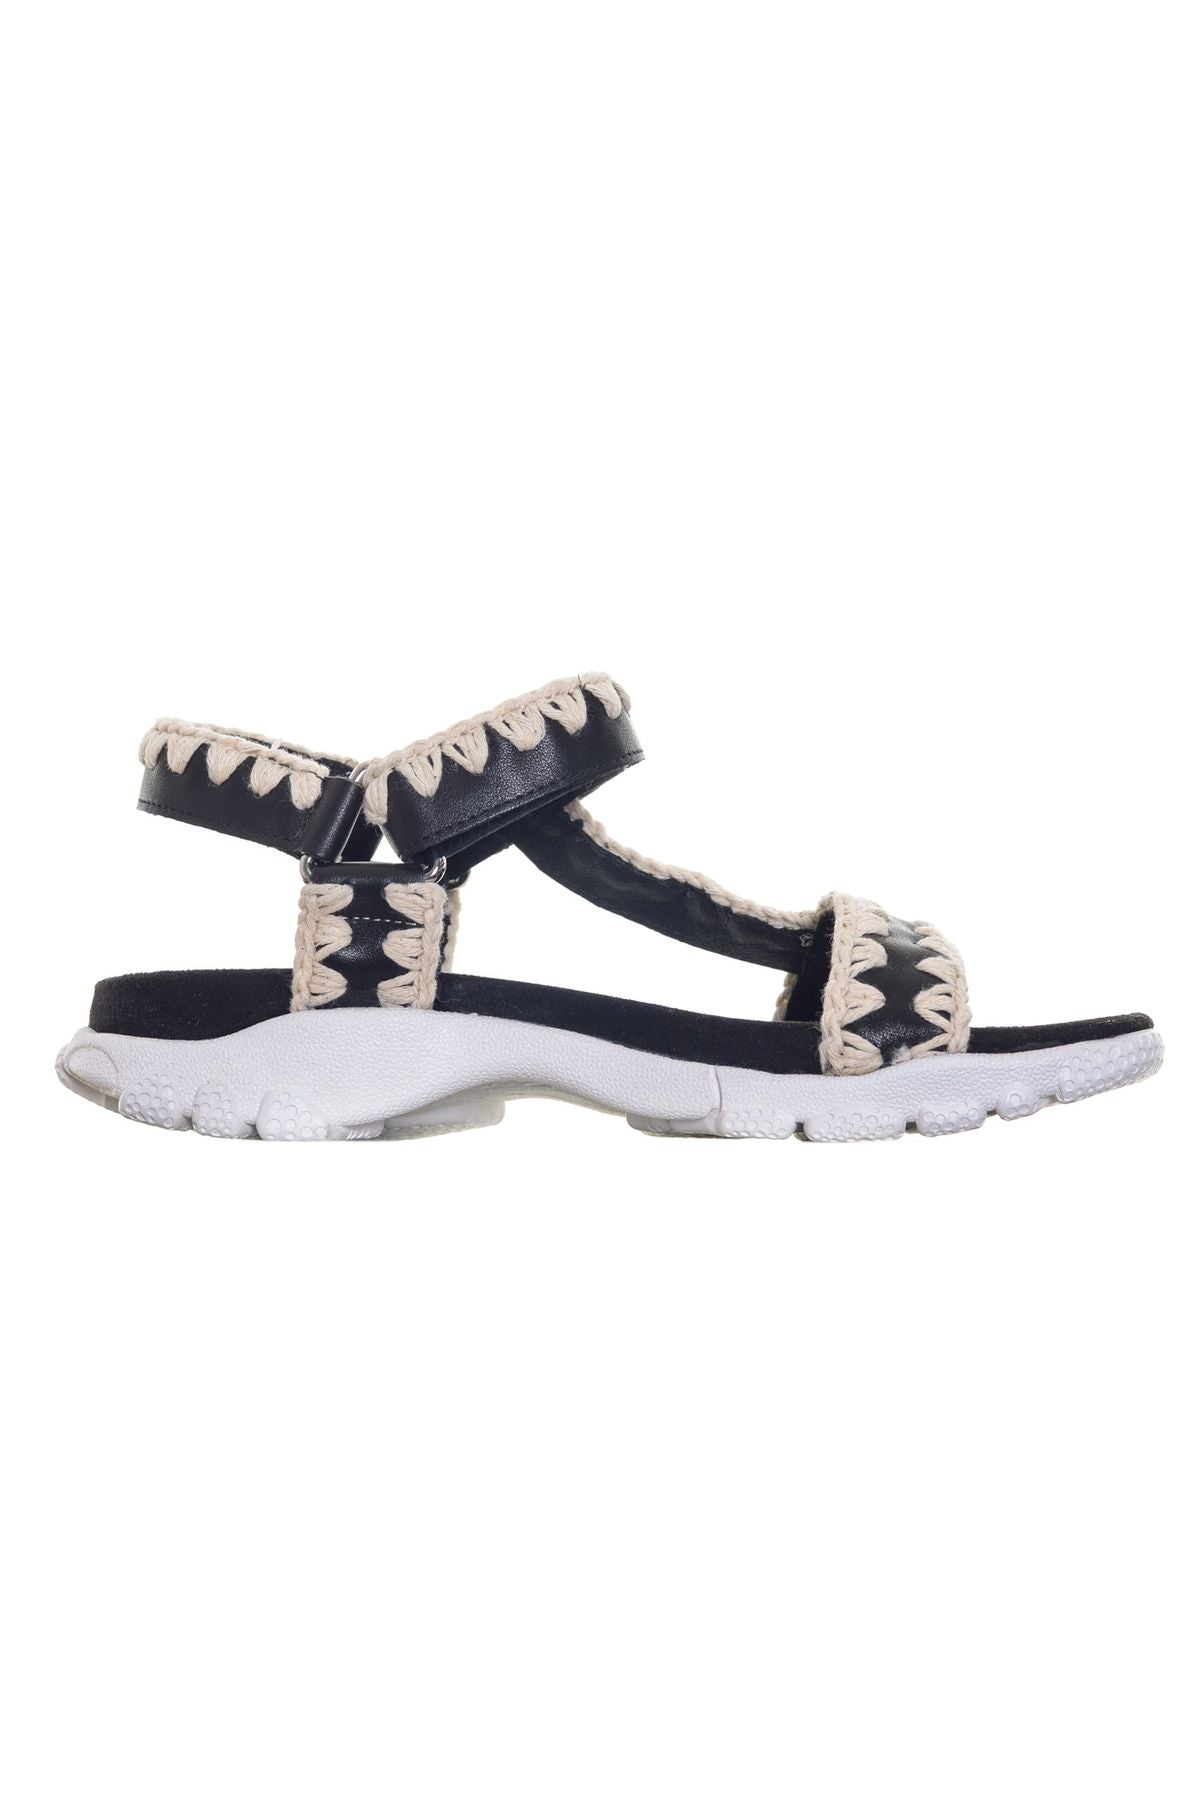 MOU Spring/Summer Sandals musw481000c